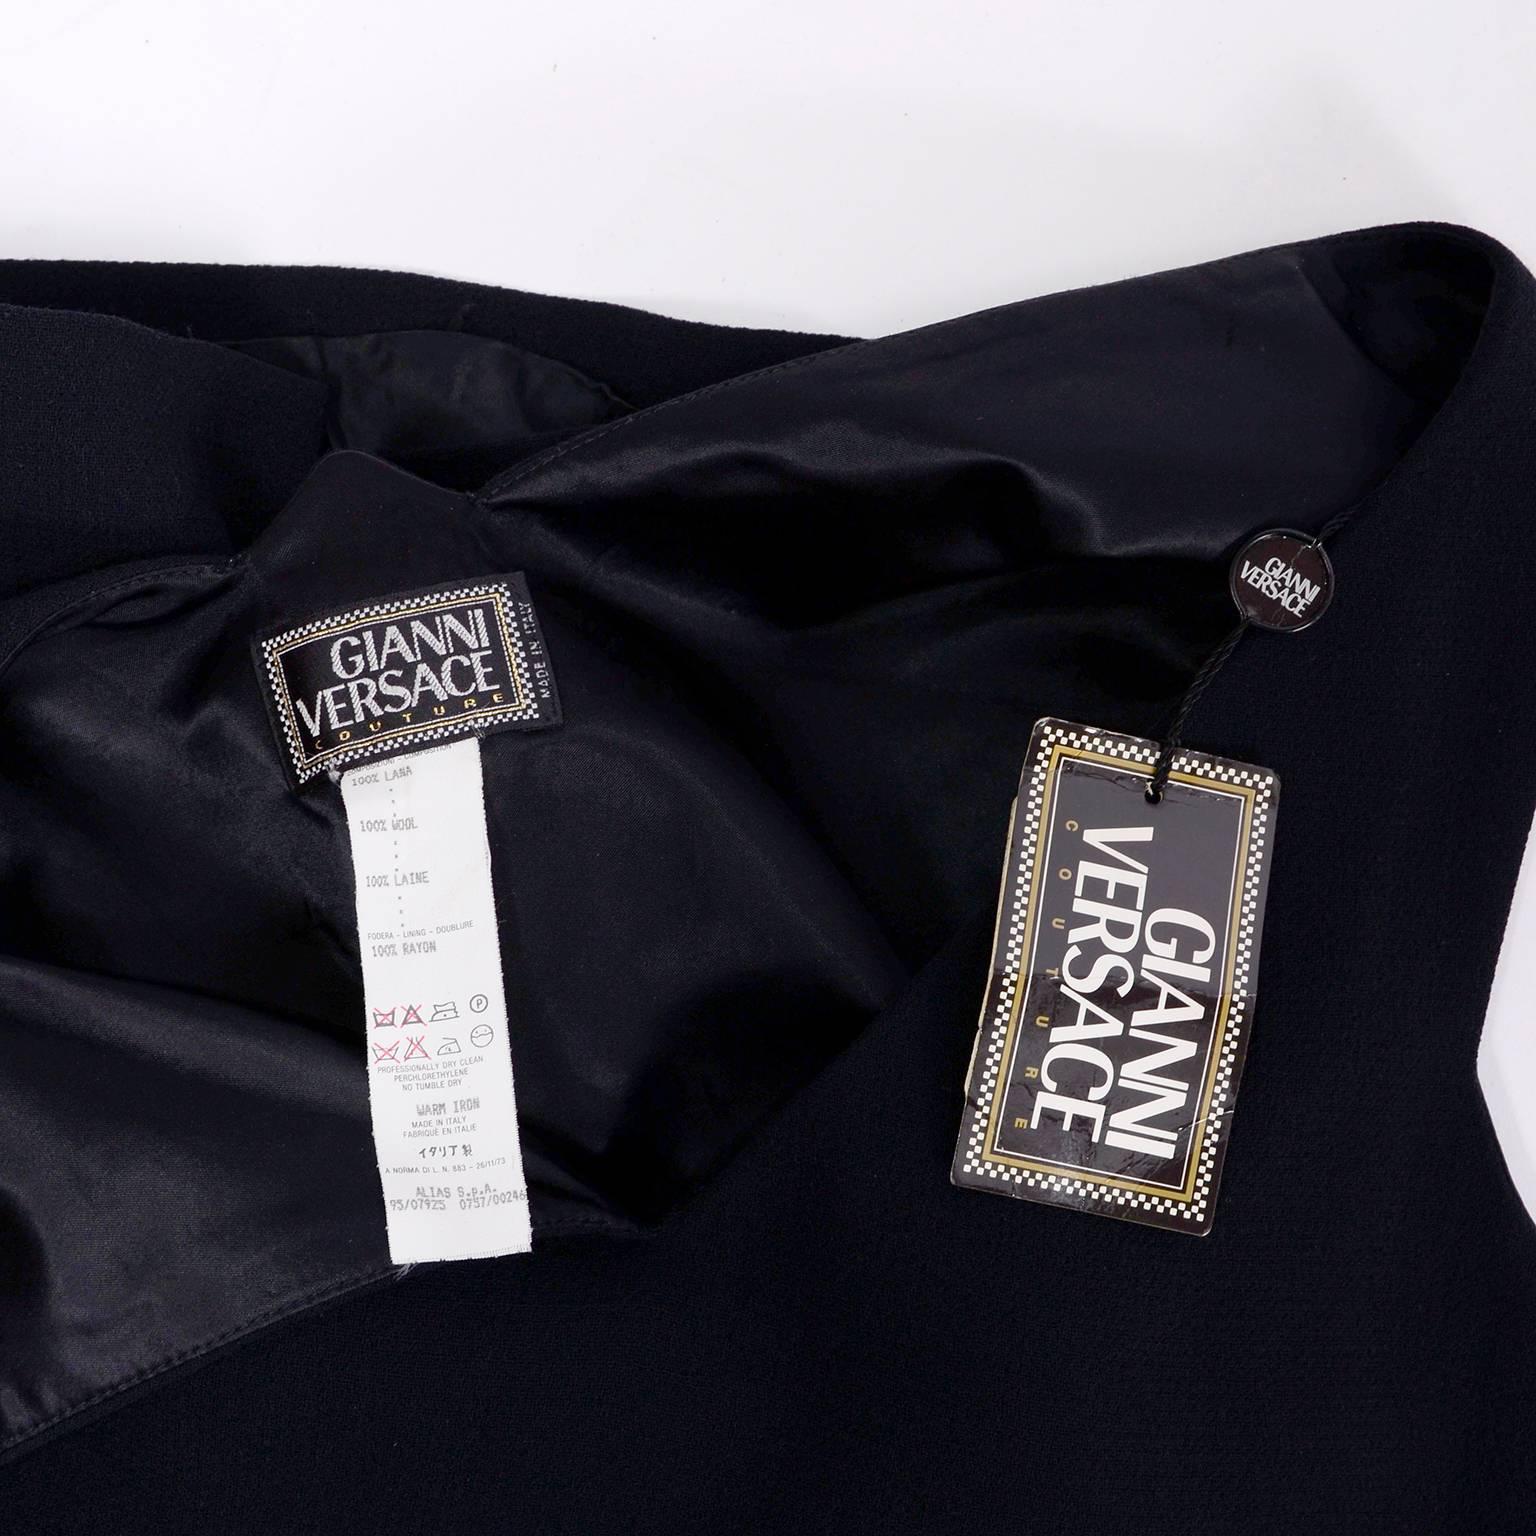 Deadstock New W/ Tags Gianni Versace Couture Vintage Little Black Dress 1995/96 For Sale 7